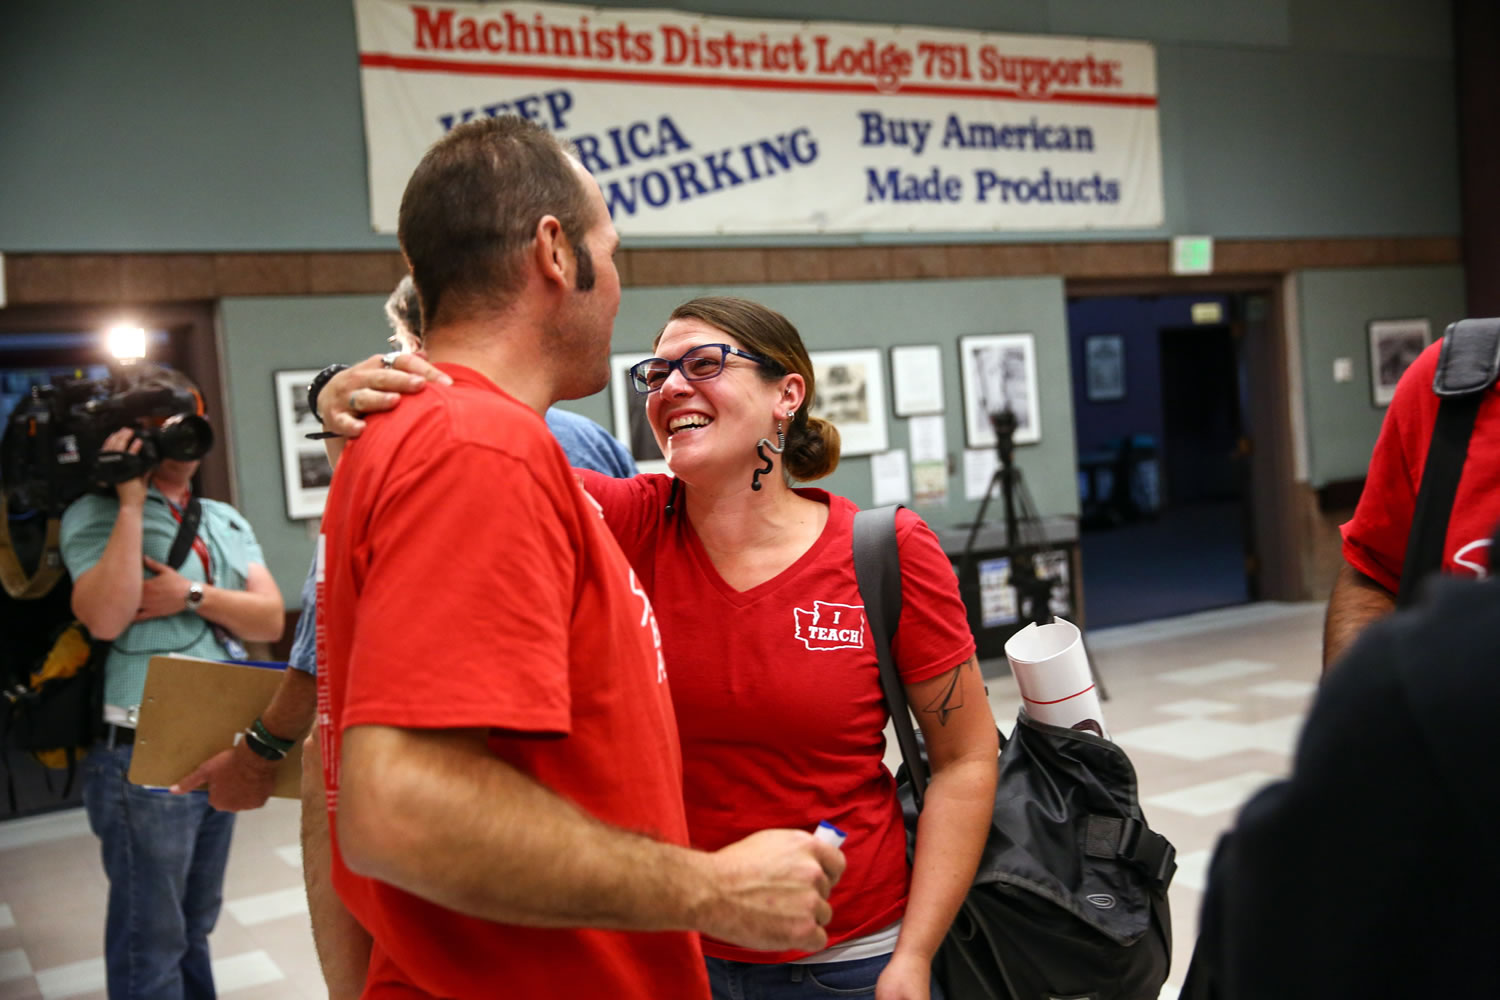 Union members embrace after Seattle Education Association leaders voted to suspend a strike Tuesday, Sept. 15, 2015, and bring a new contract for Seattle Public Schools educators to a vote on Sunday. The vote to suspend the strike was held at the Aerospace Machinists Union hall in Seattle.